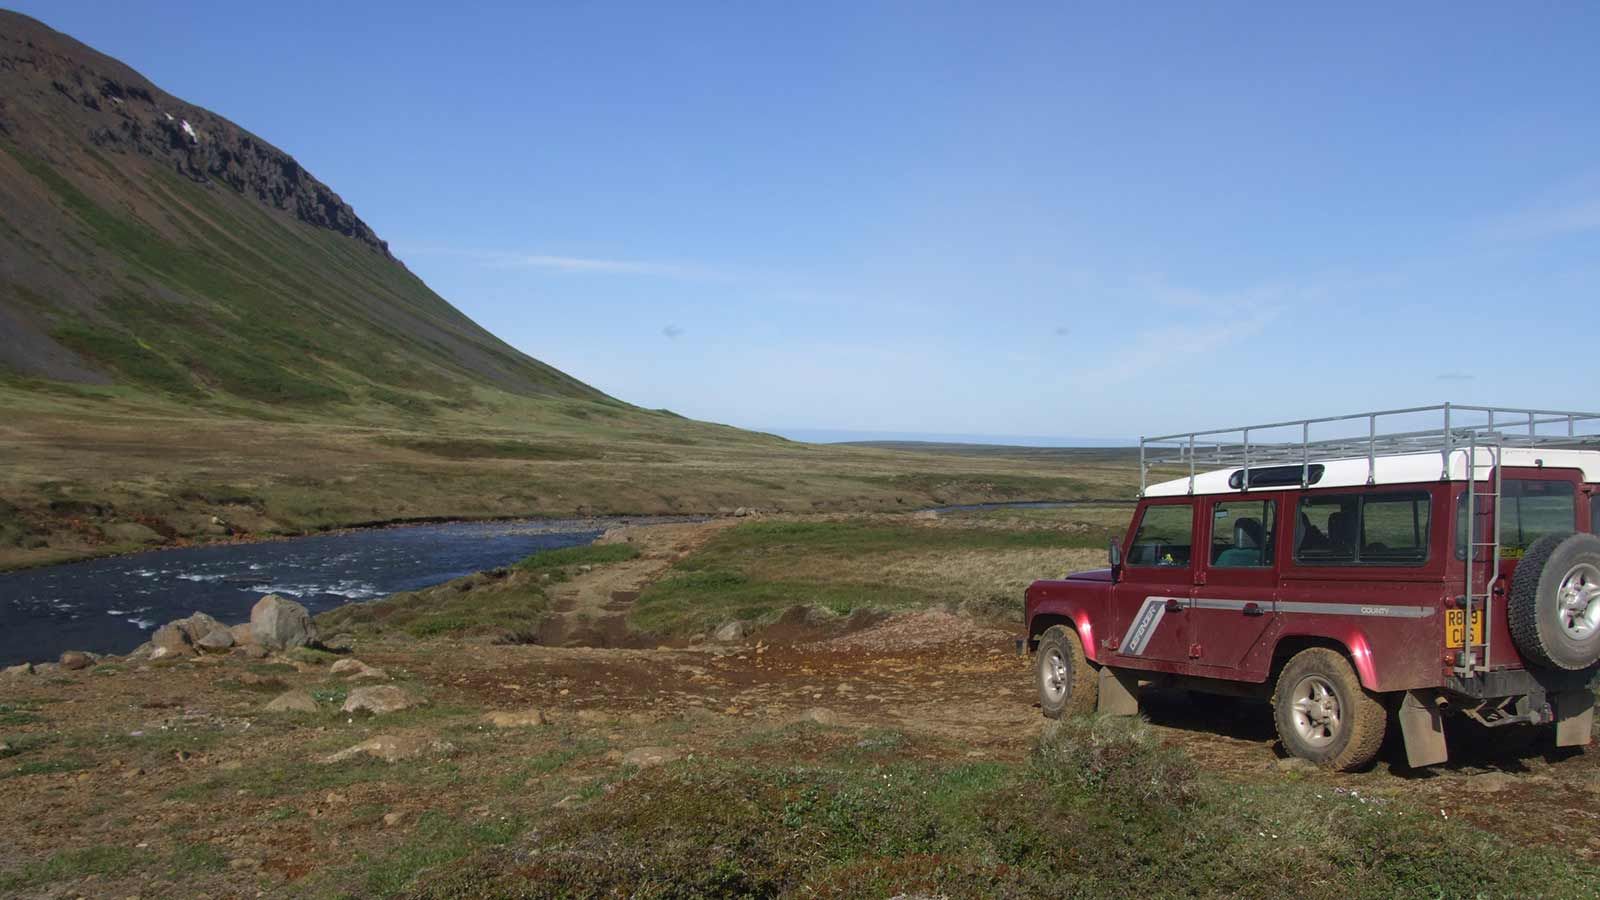 NABO Project Land Rover prepares to cross river in Iceland.